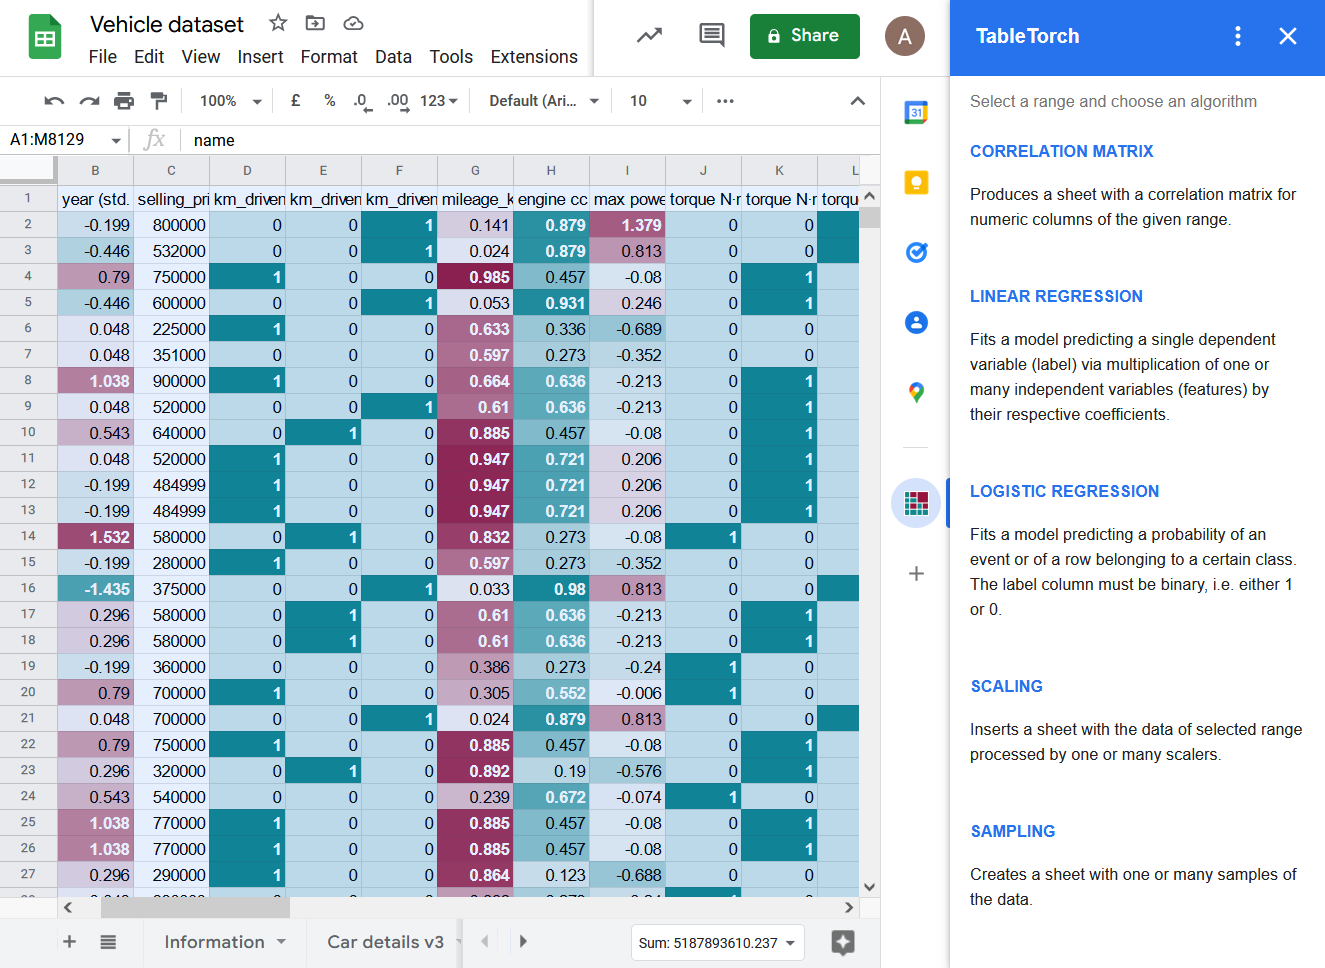 Google Sheets™ spreadsheet with the TableTorch add-on